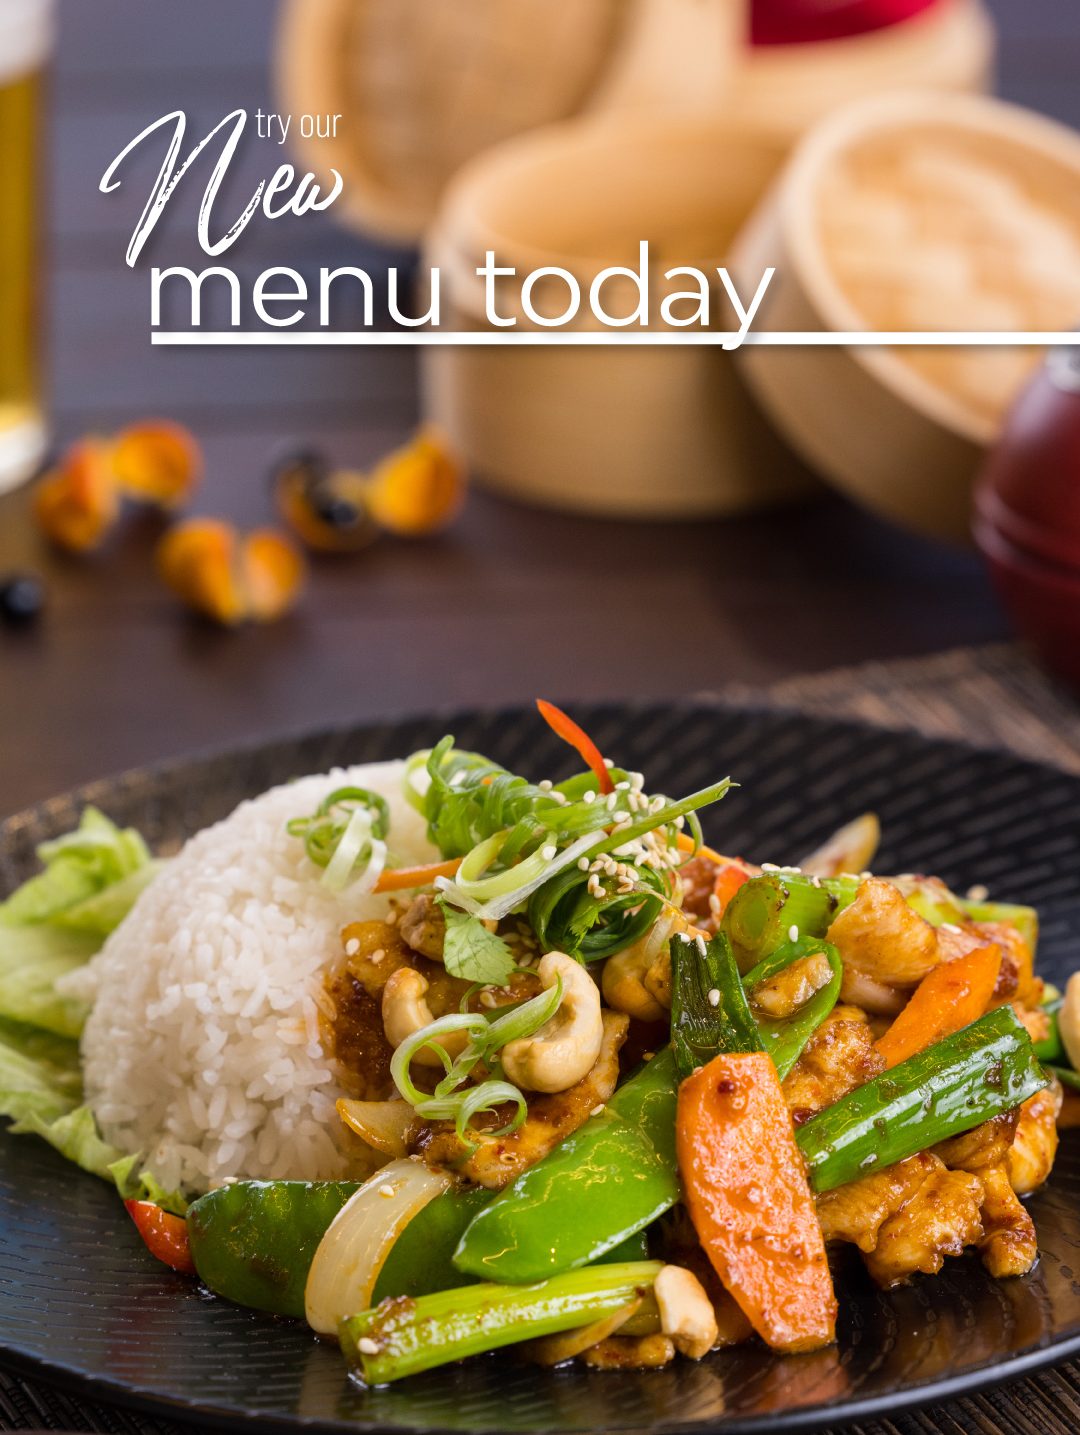 Delicious new menu try today - Norths Devils Nundah